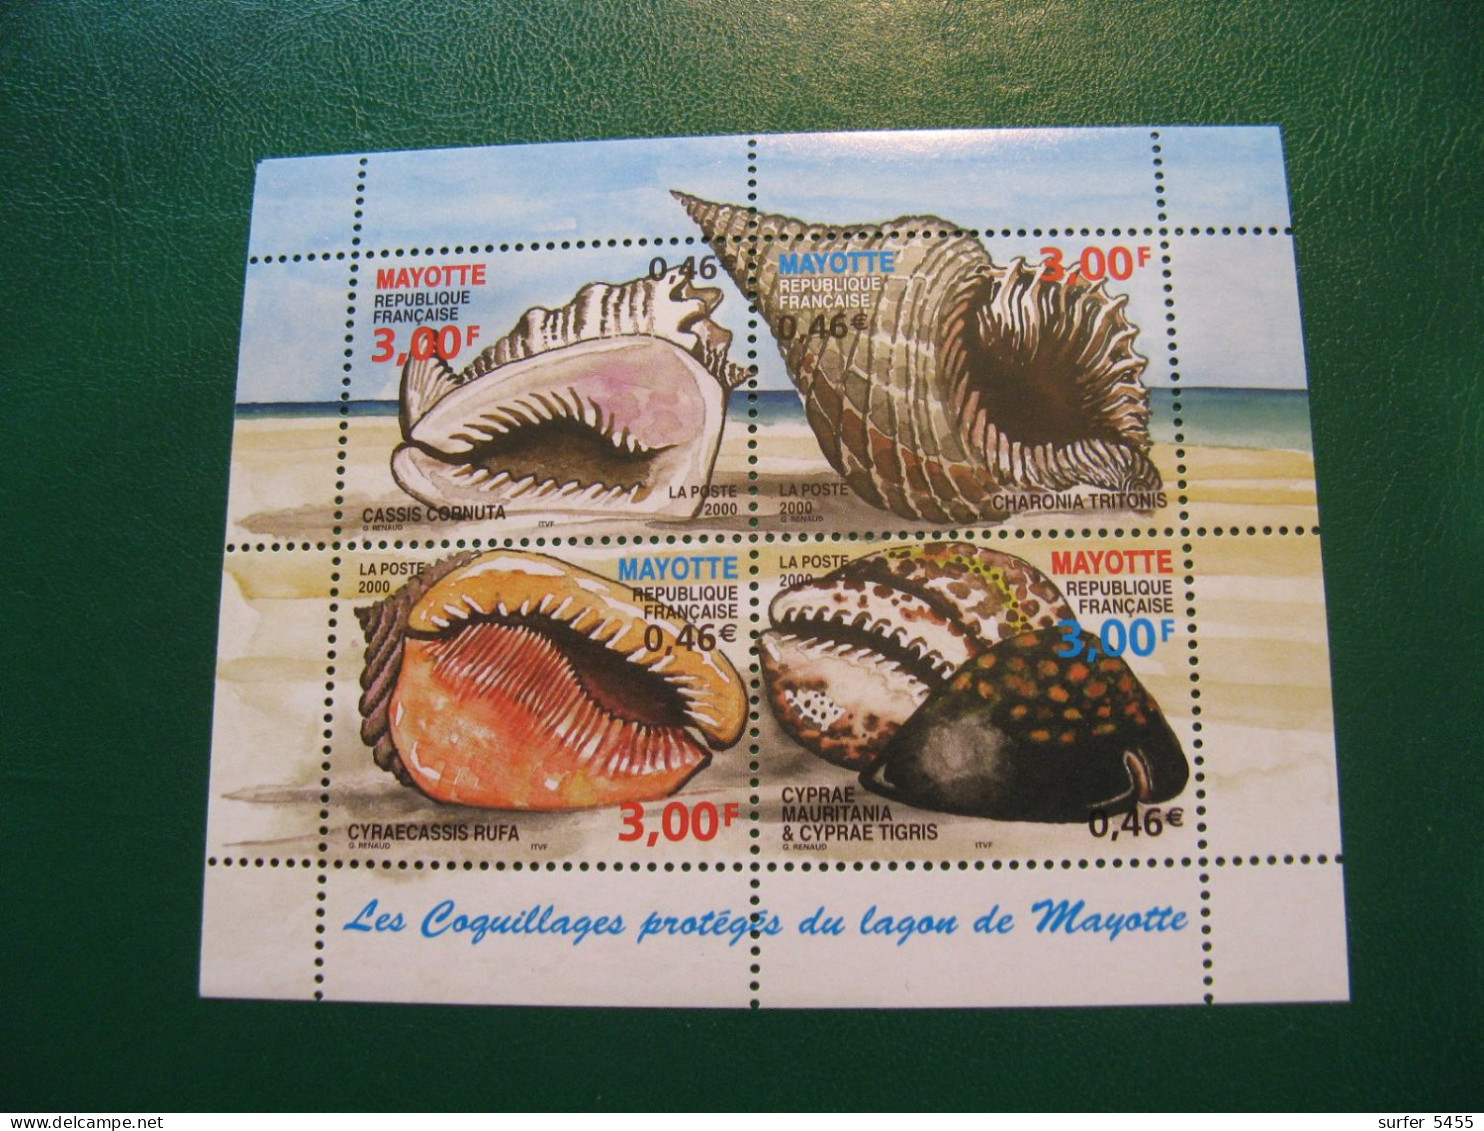 MAYOTTE BLOC FEUILLET N° 4 NEUF** LUXE - MNH - COTE 16,00 EUROS - Nuovi